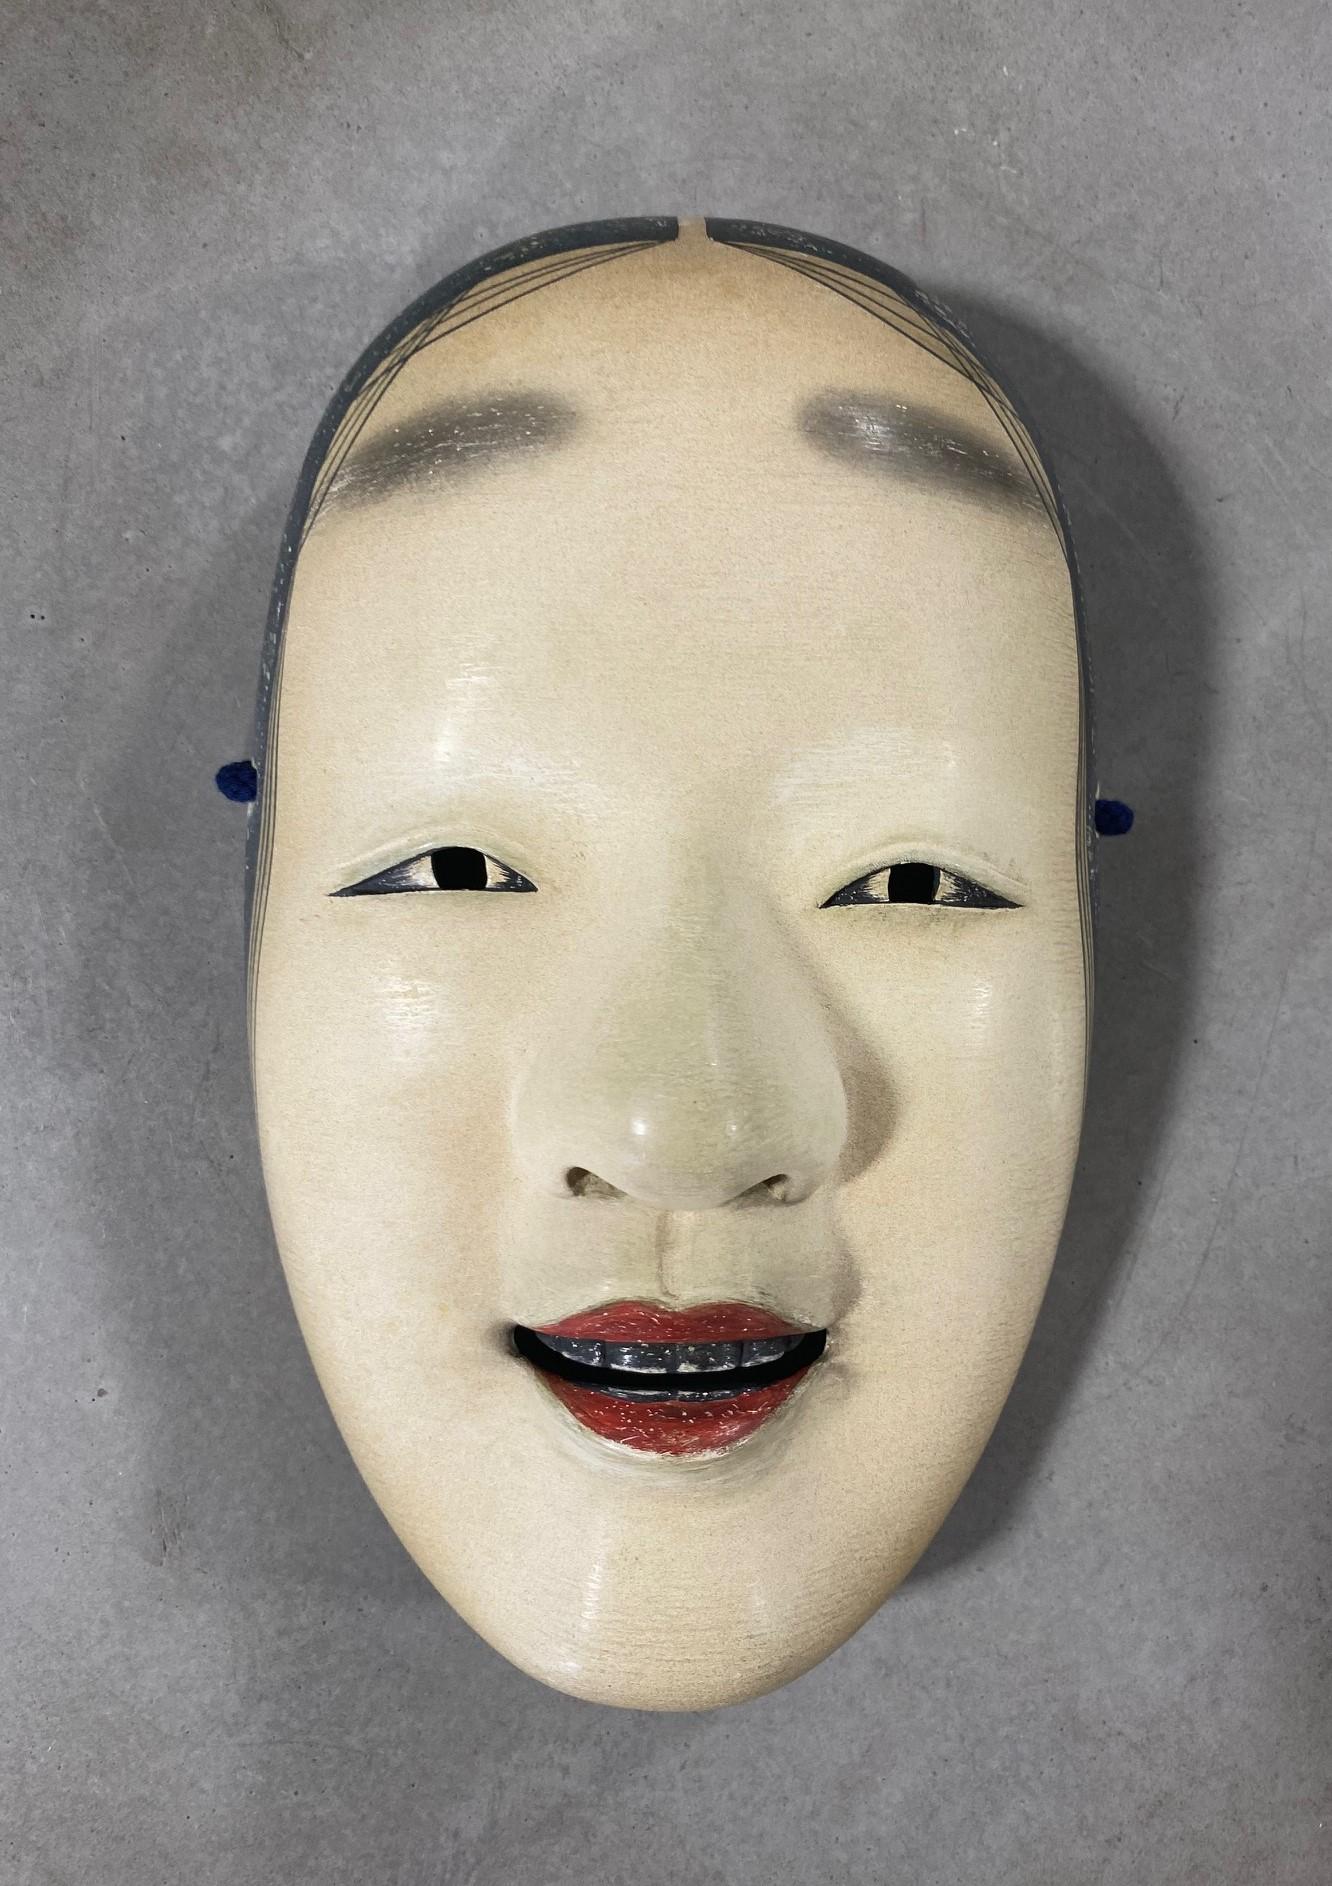 A truly beautiful, wonderfully crafted, alluring female mask made for the Japanese Noh theatre. 

This mask is handcrafted and carved from natural wood and lacquer.

Omi-Onna's (sometimes Ohmi-Onna or Oumionna) character and mask are that of a